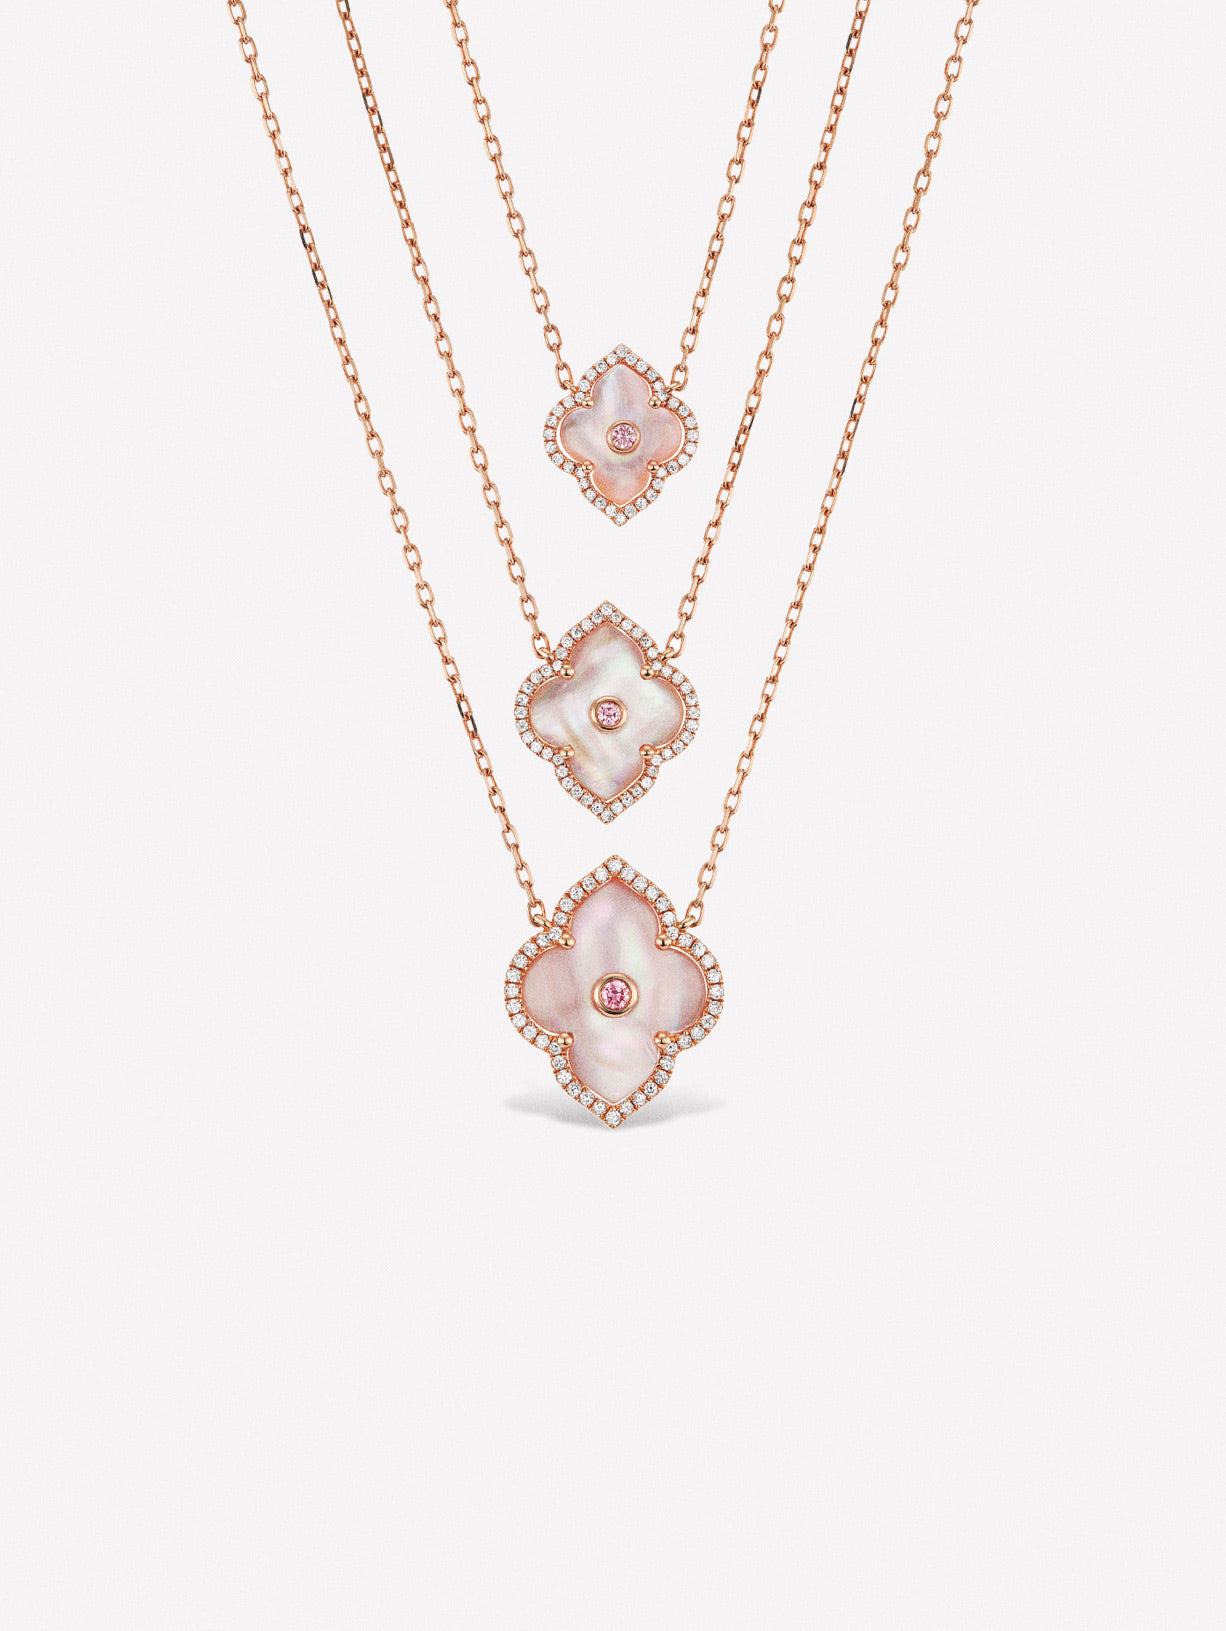 Argyle Pink™ Diamond and Mother of Pearl Mini Necklace - Pink Diamonds, J FINE - J Fine, Necklaces - Pink Diamond Jewelry, argyle-pink™-diamond-and-mother-of-pearl-mini-necklace-by-j-fine